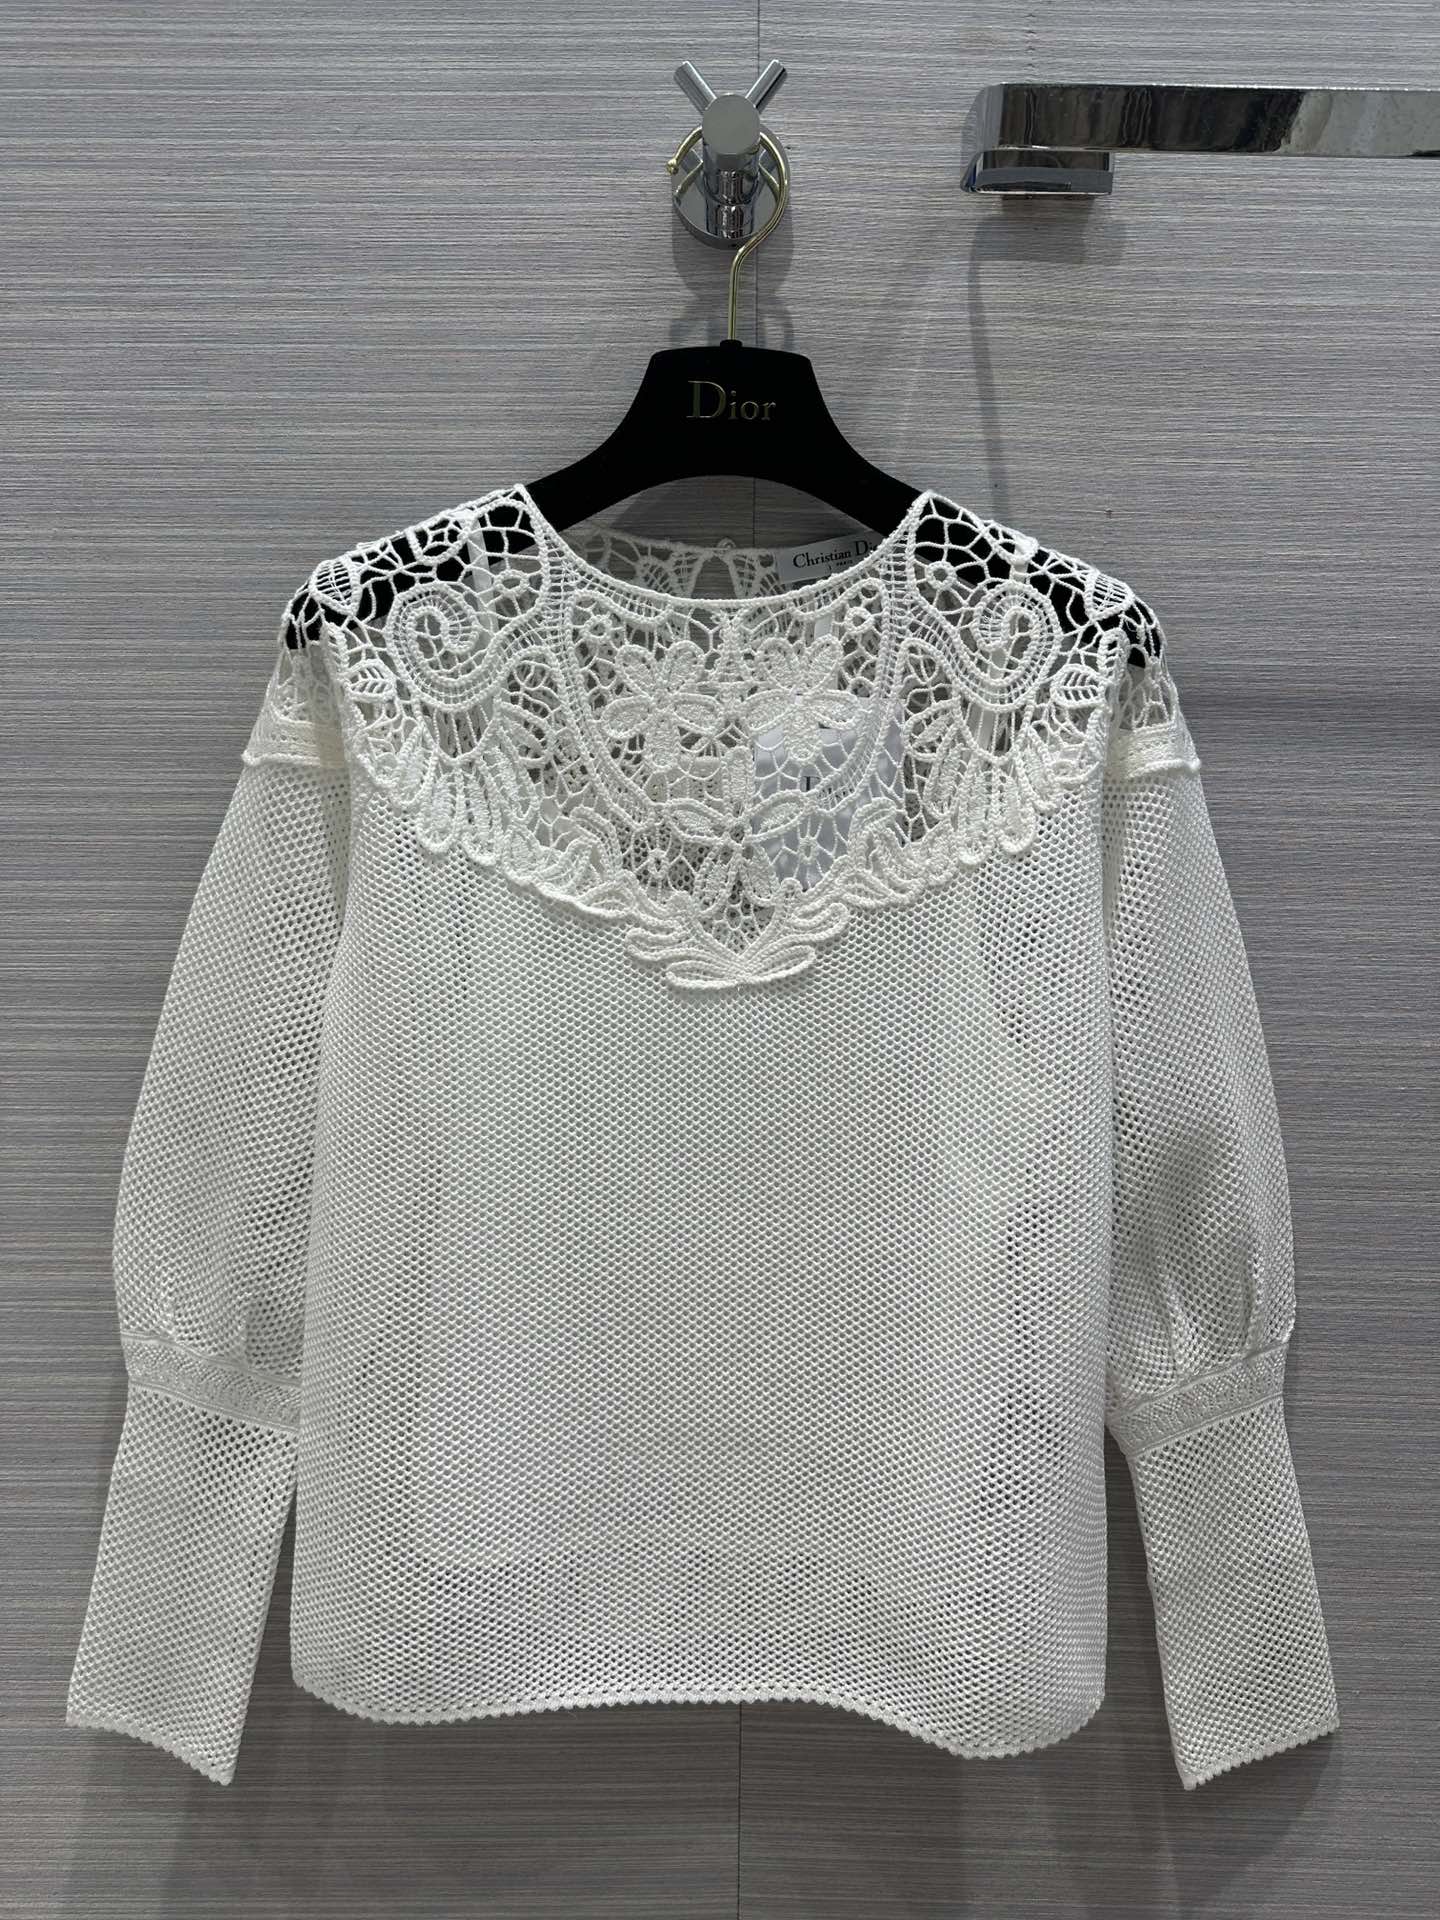 Dior Clothing Knit Sweater White Cotton Knitting Spring/Summer Collection